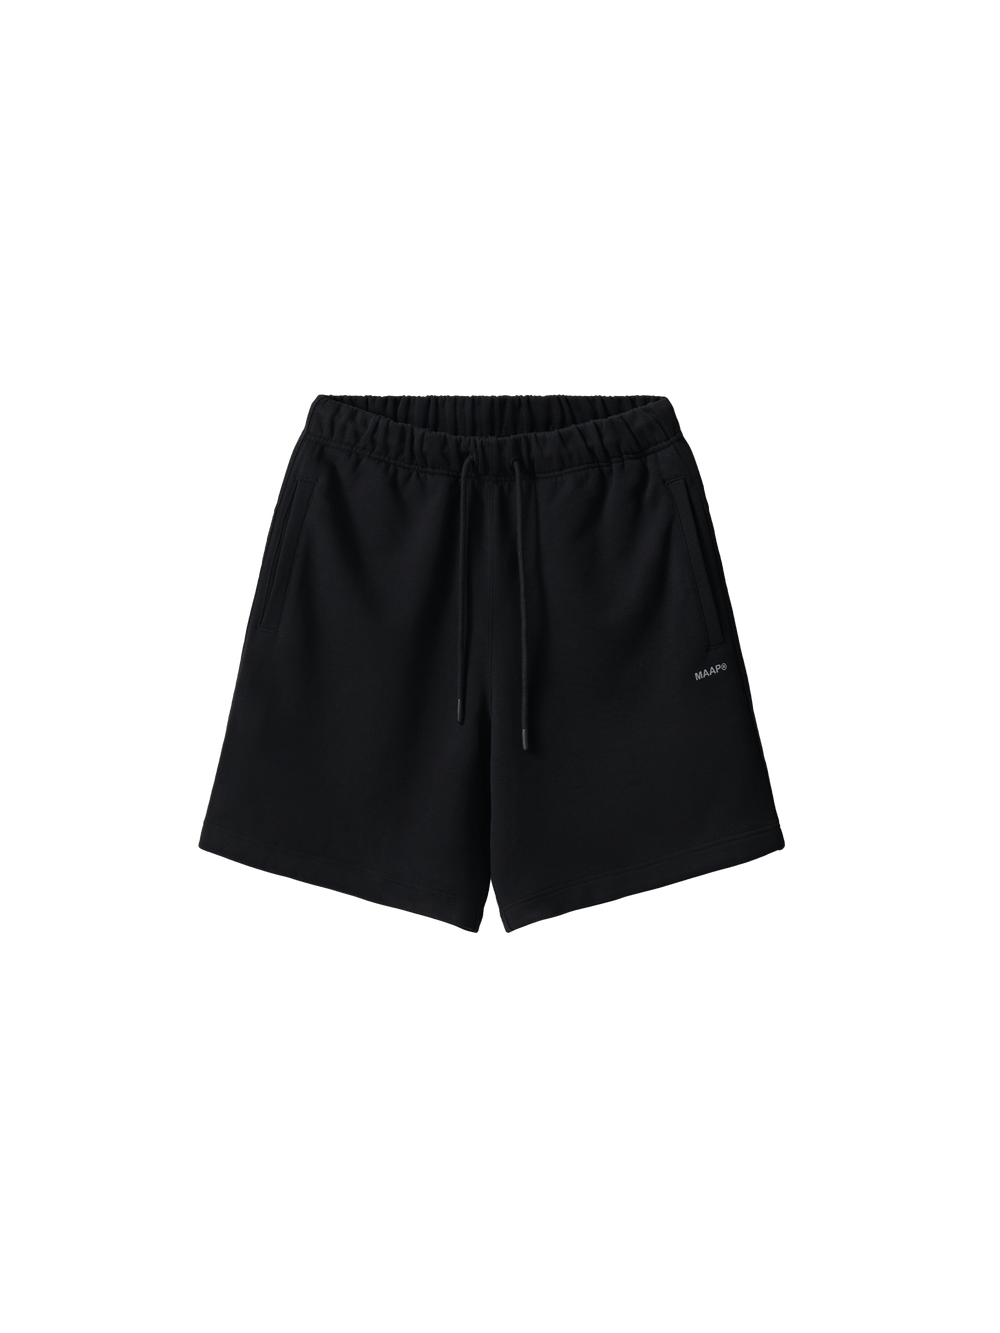 Product Image for Essentials Sweat Short